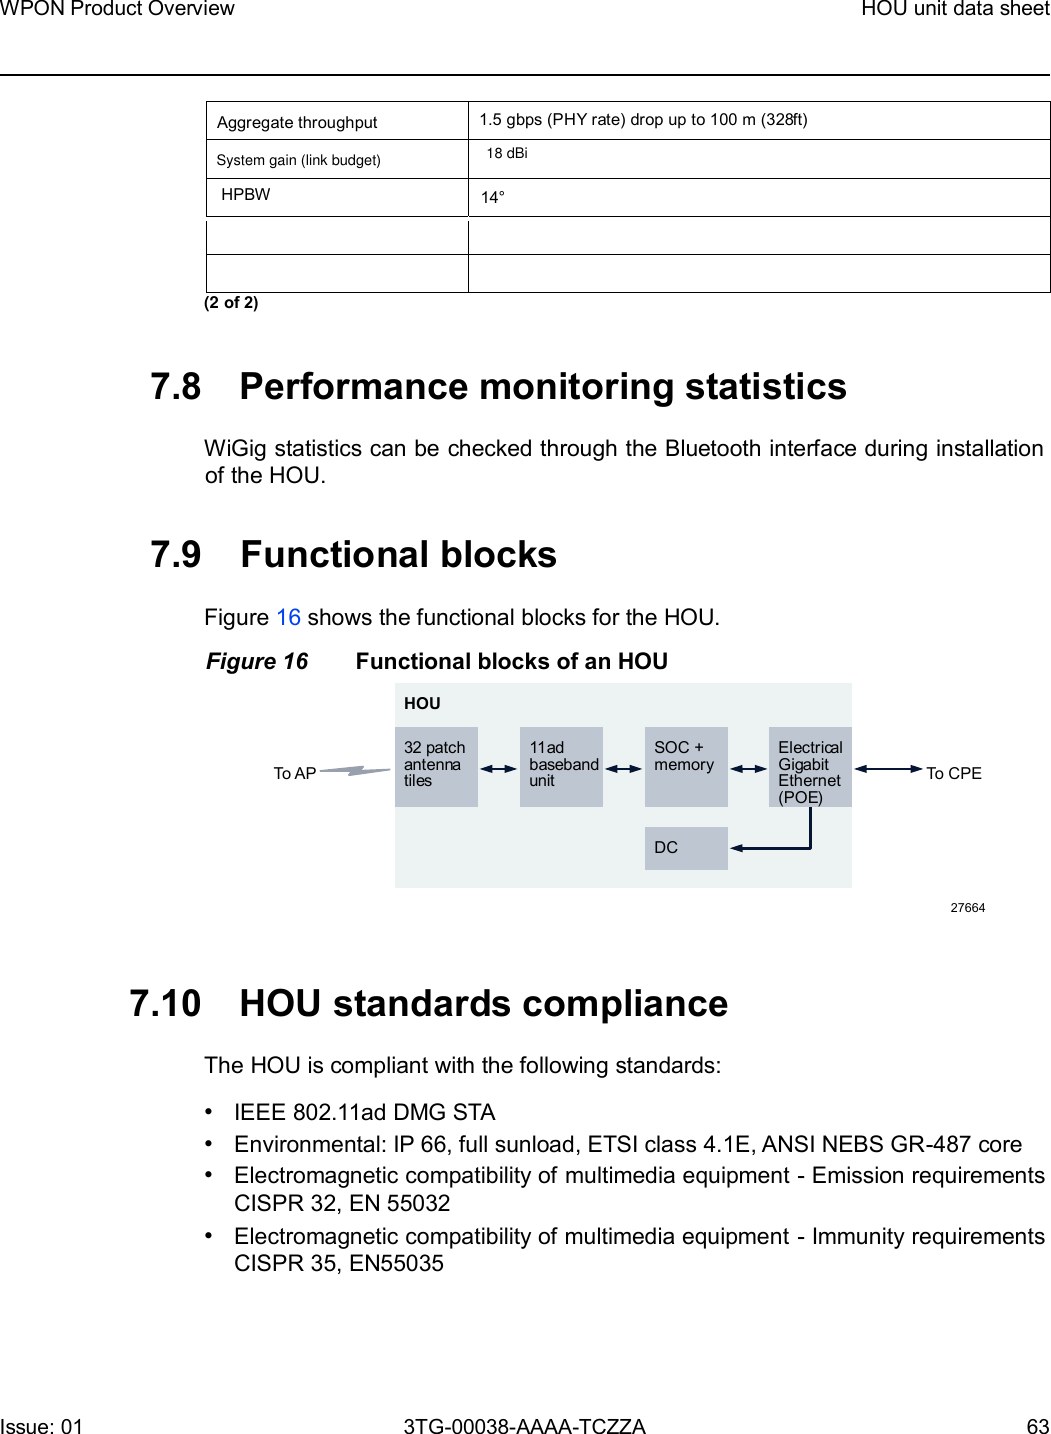 Page 63 of Nokia Bell 7577WPONAPED WPON User Manual WPON Product Overview